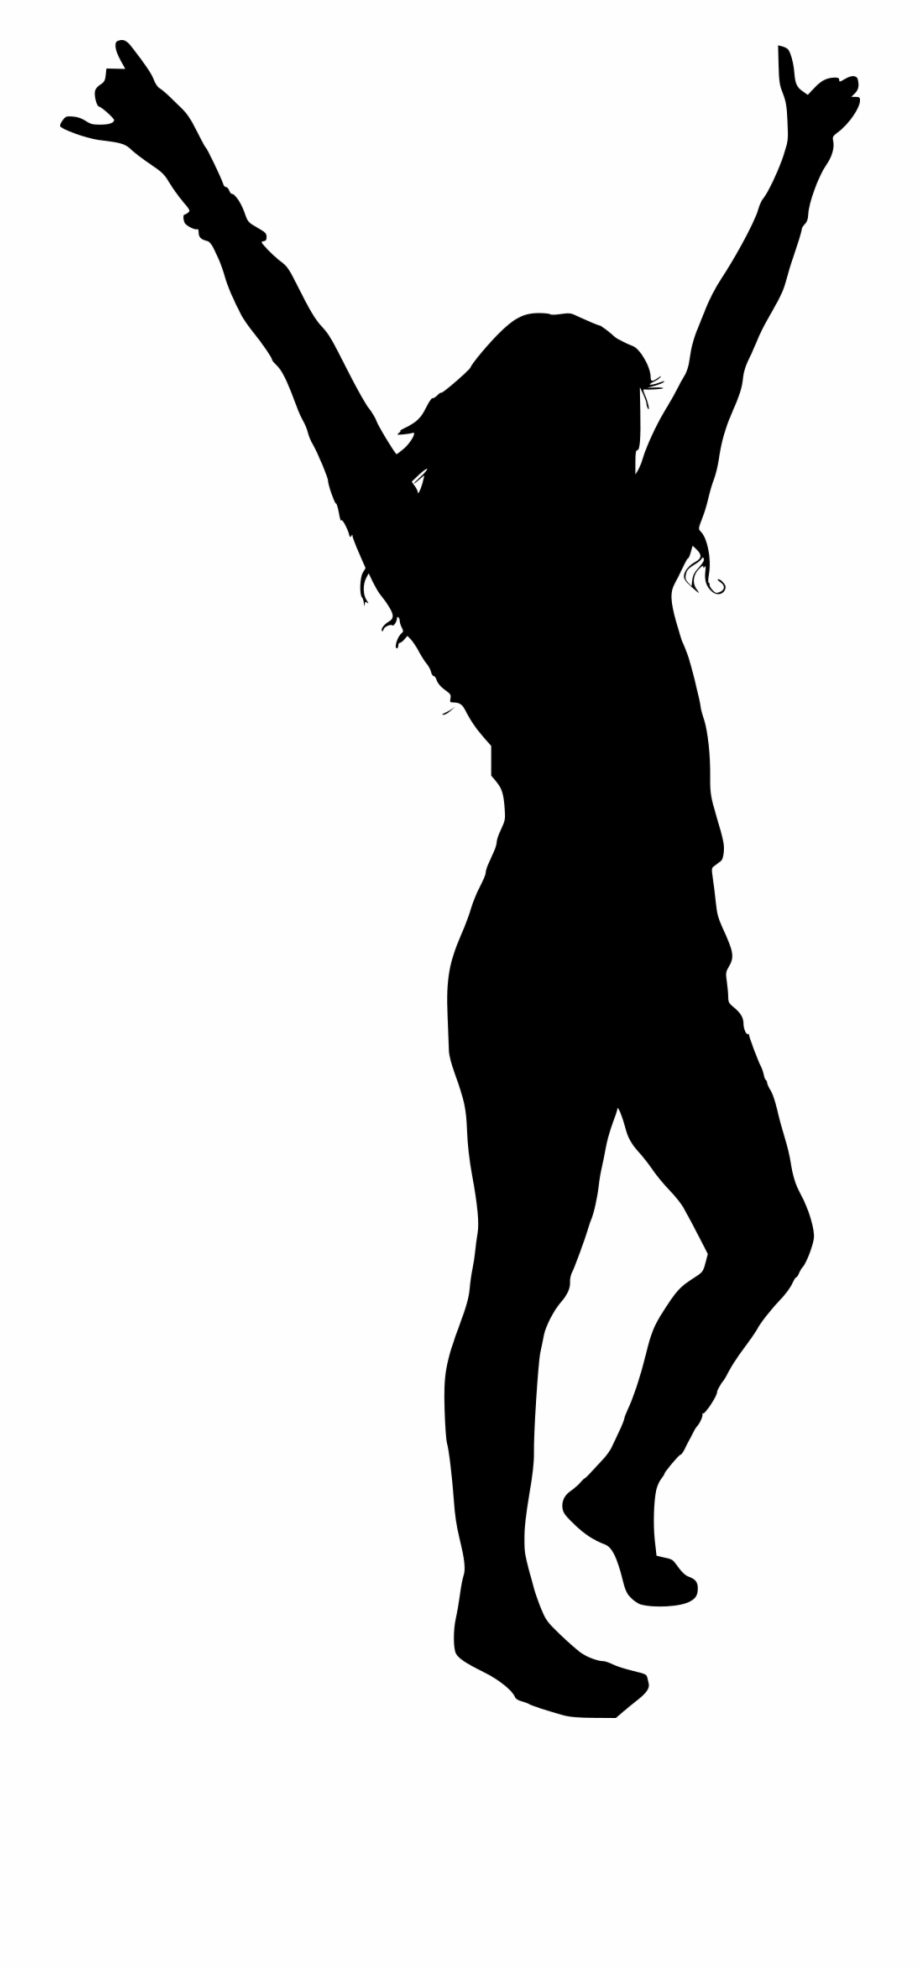 woman hands up silhouette
